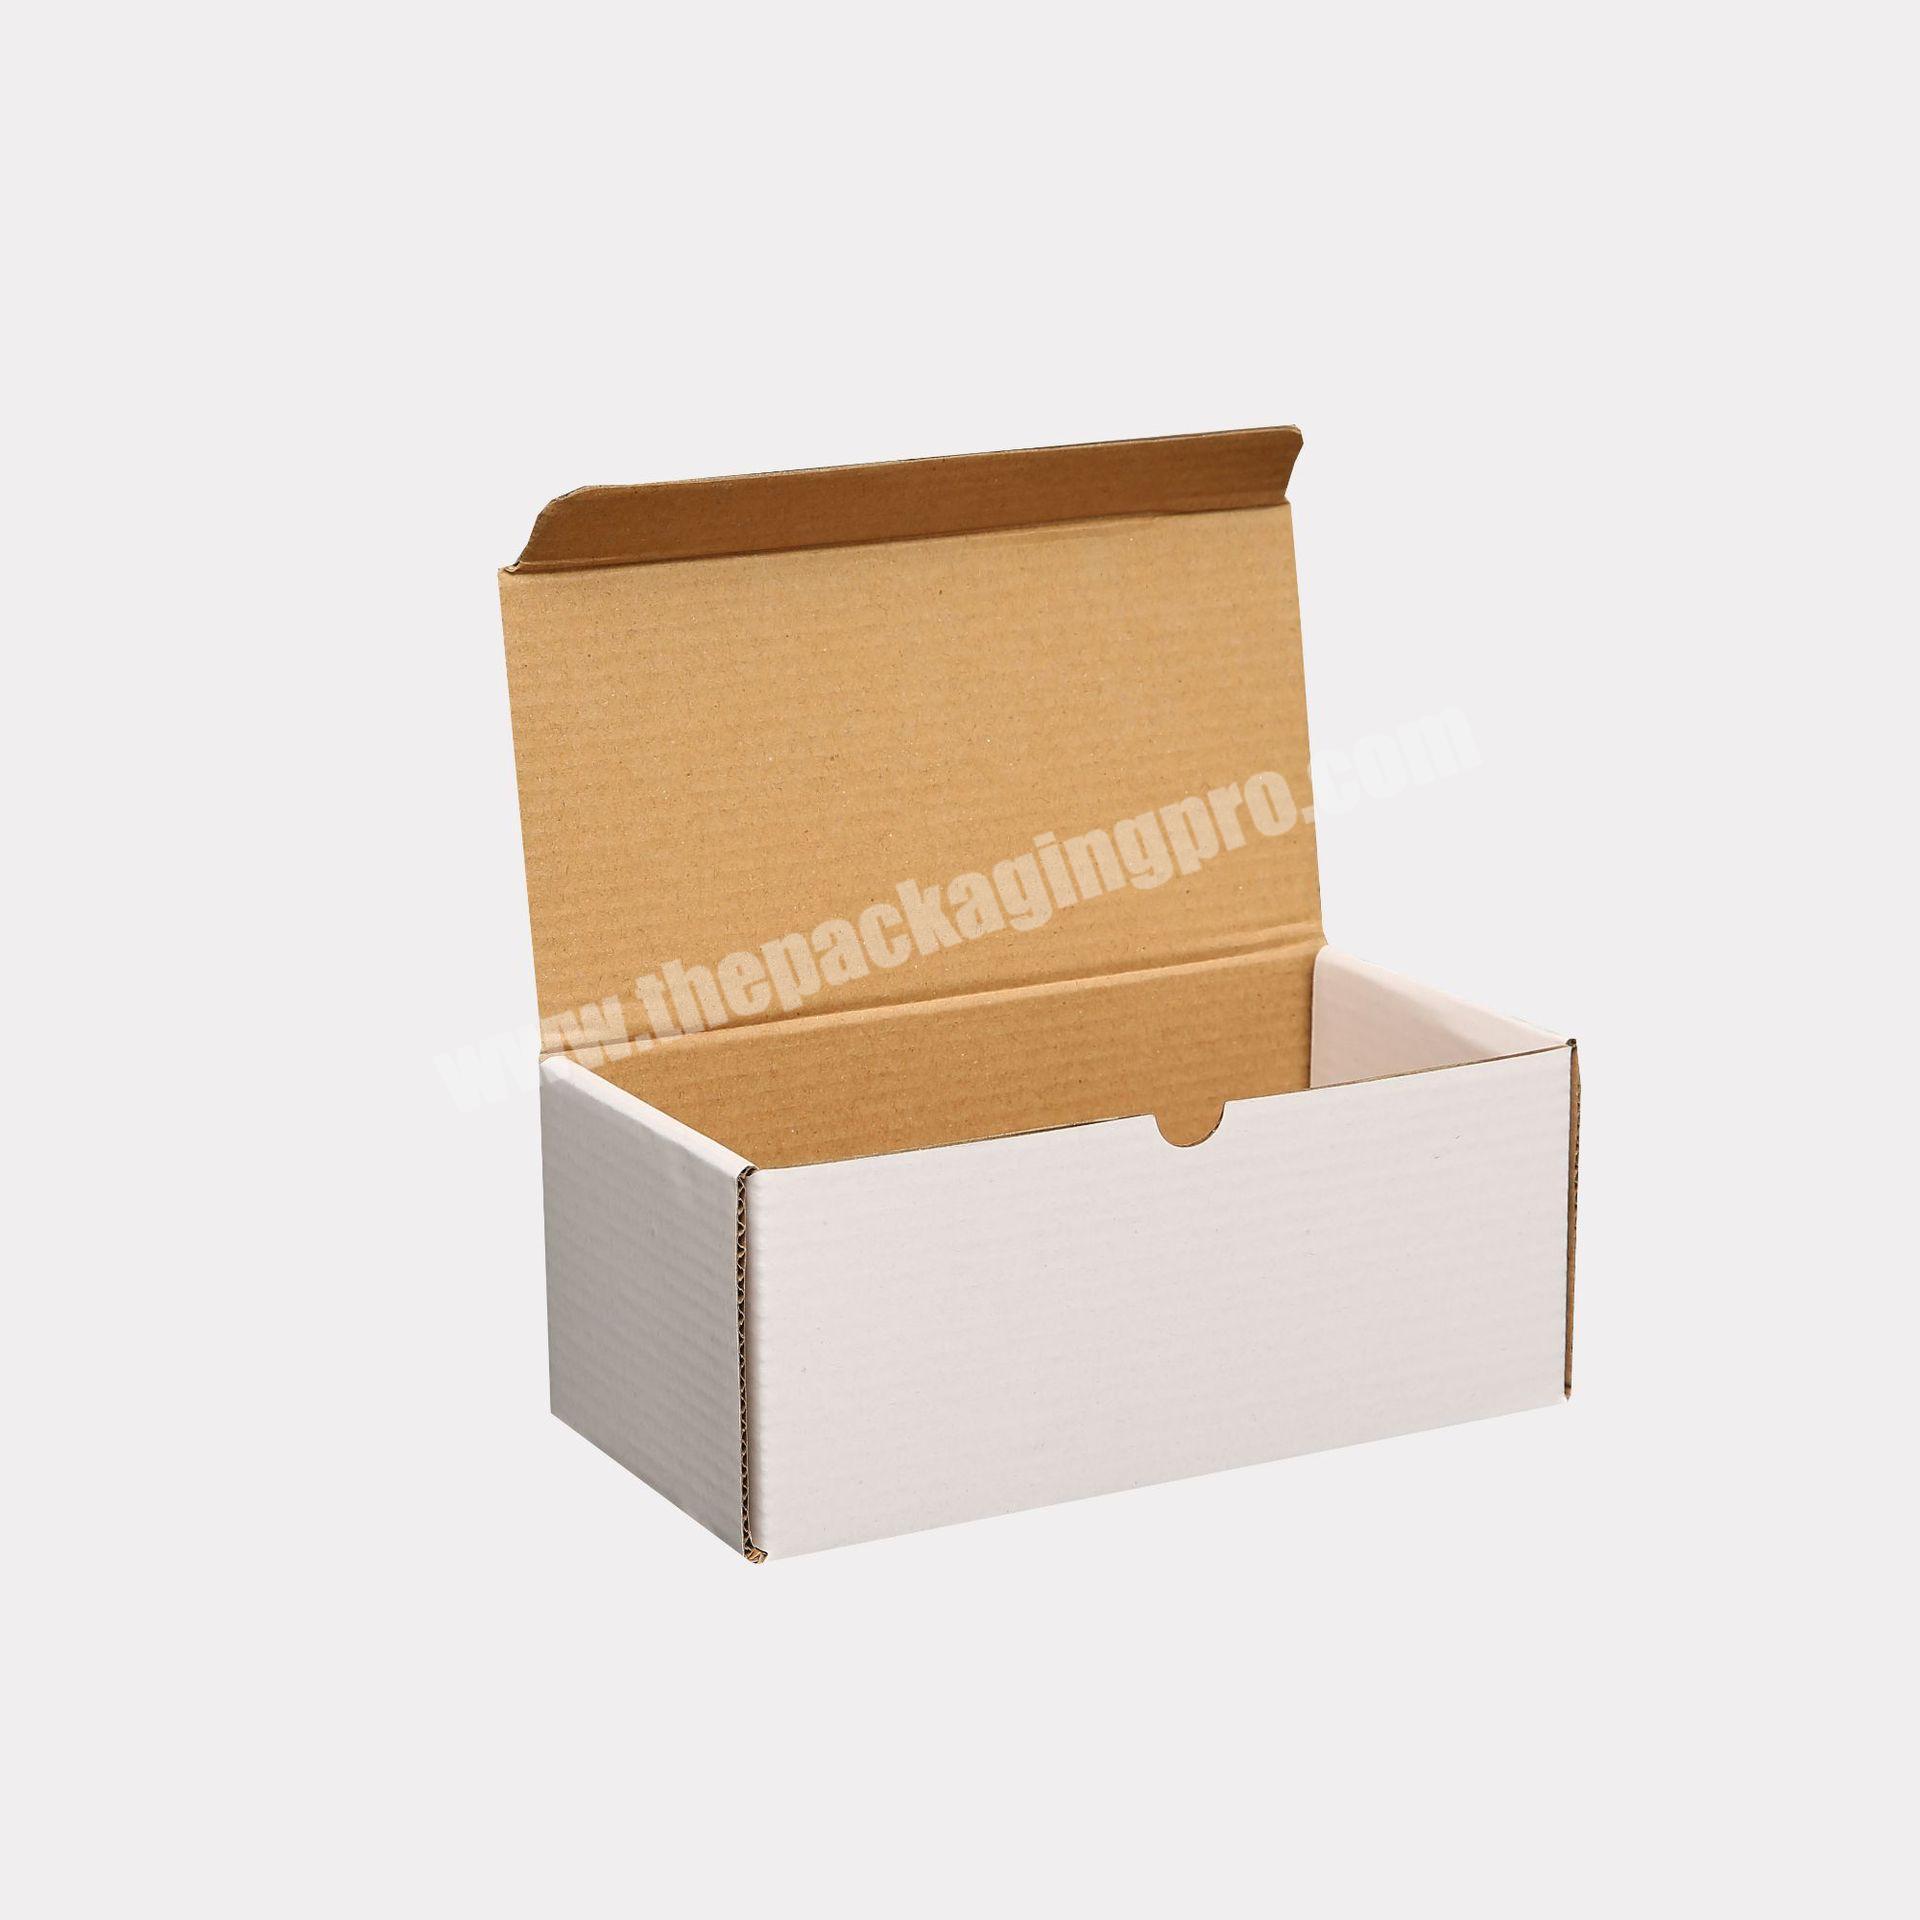 Custom paper packing box household products shipping boxes packing box cardboard